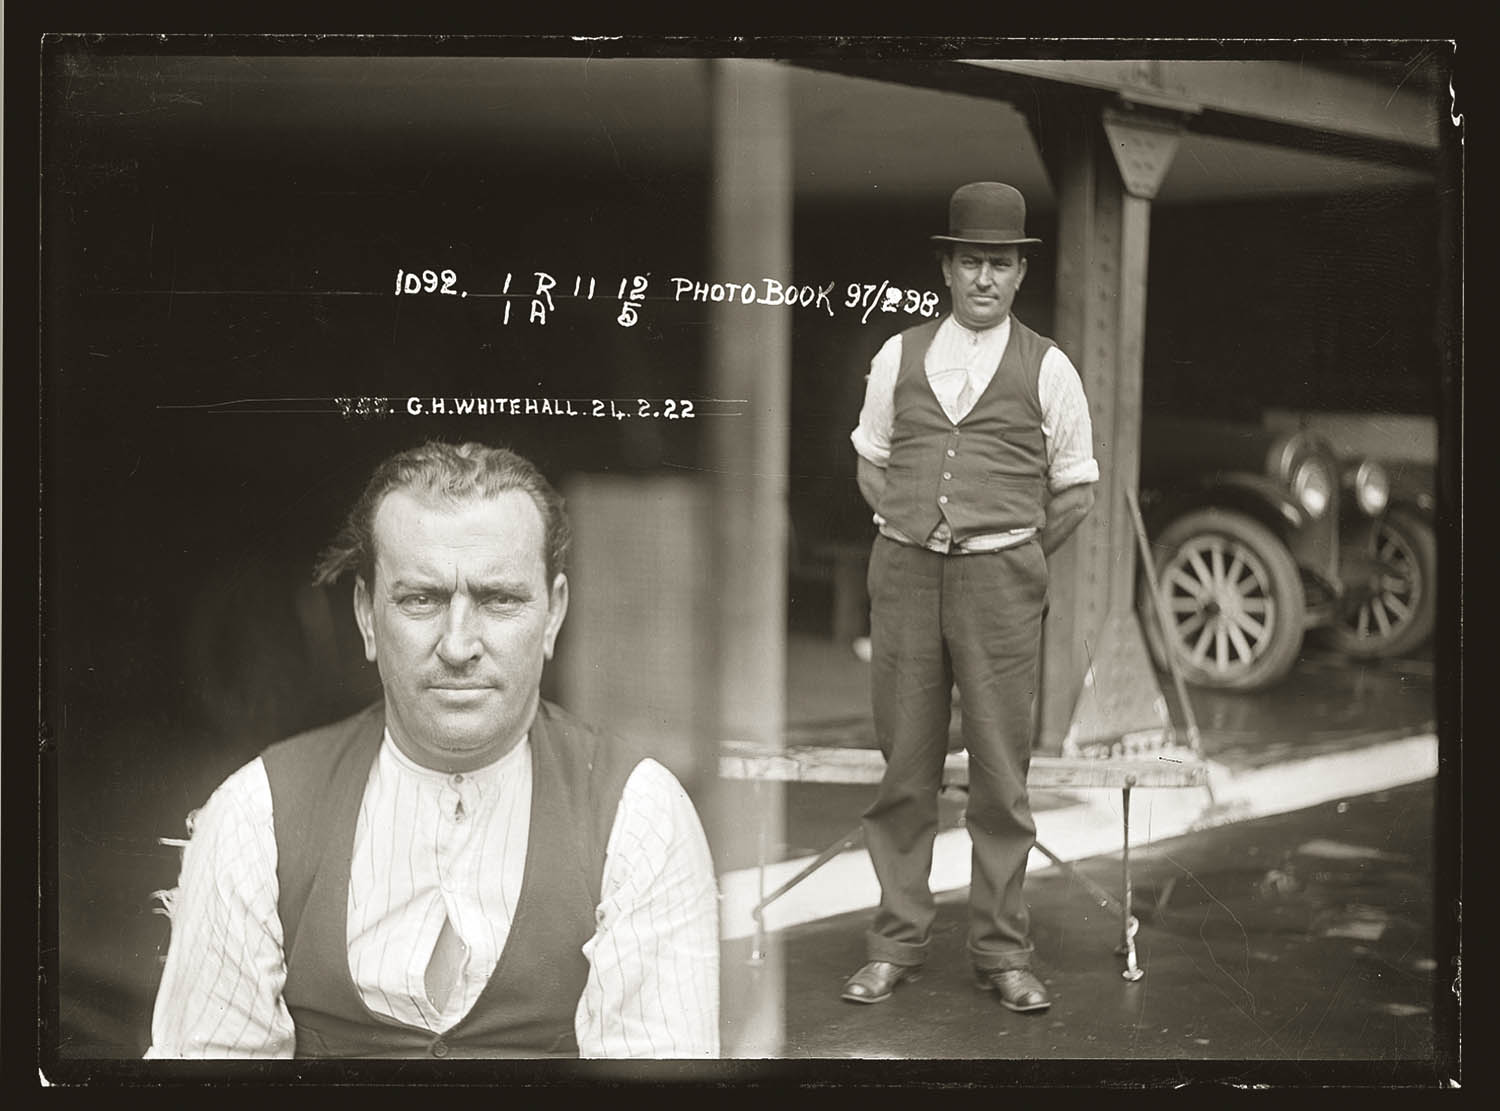 Mug shot of George Whitehall, 24 February 1922, possibly rear of Newtown Police Station.